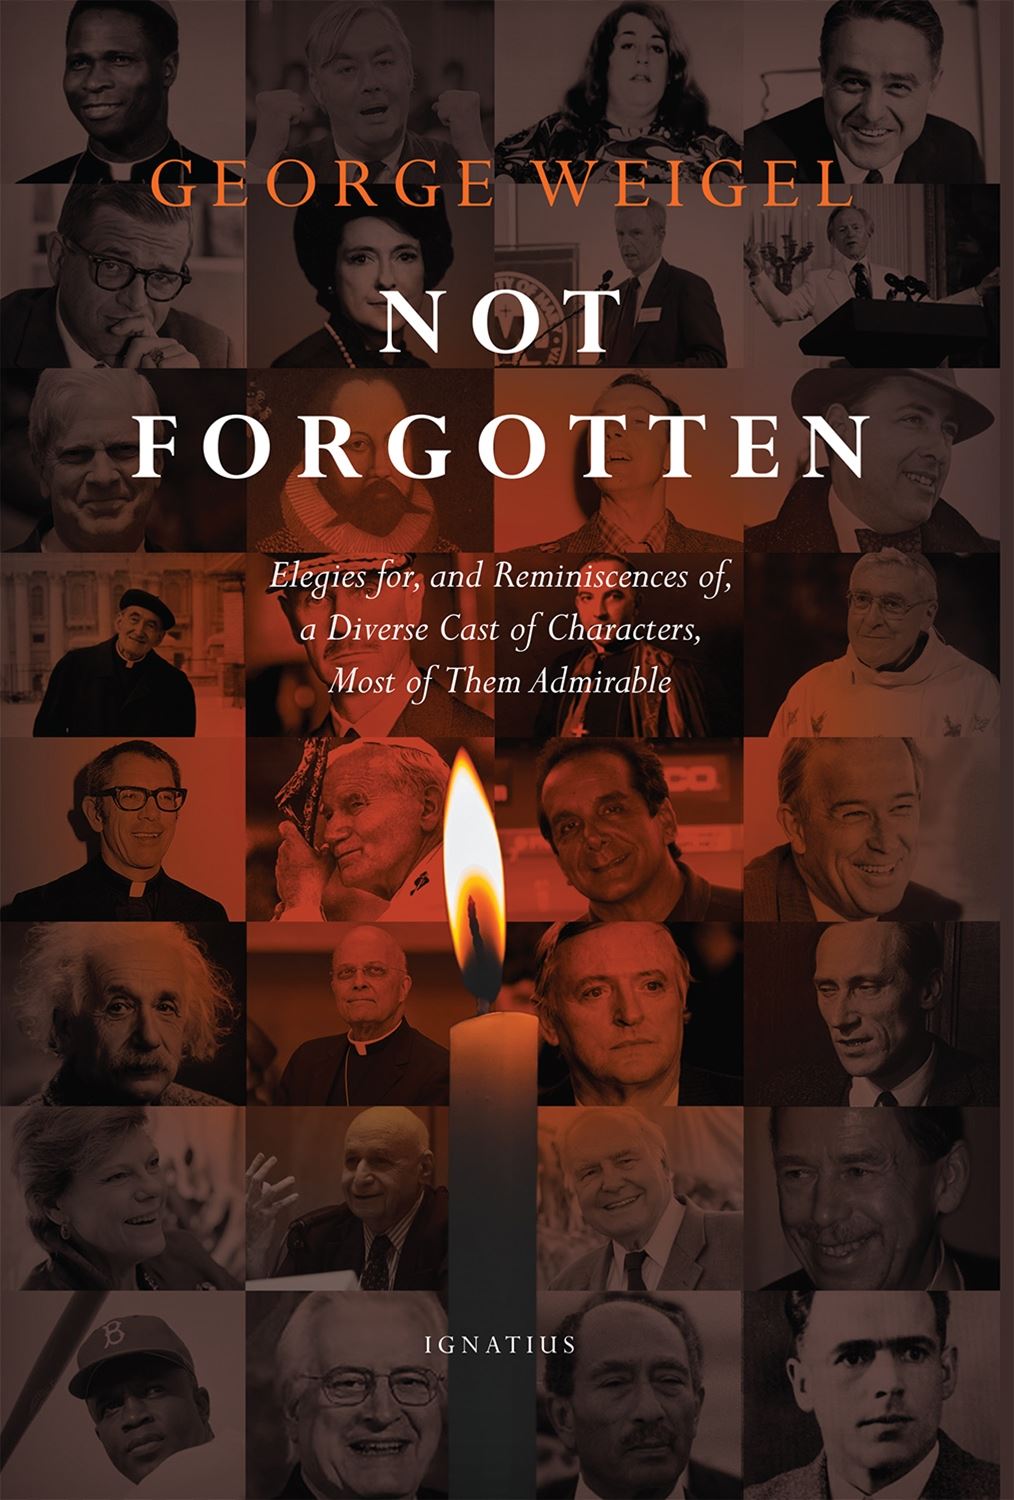 Not Forgotten: Elegies for, and Reminiscences of, a Diverse Cast of Characters, Most of Them Admirable